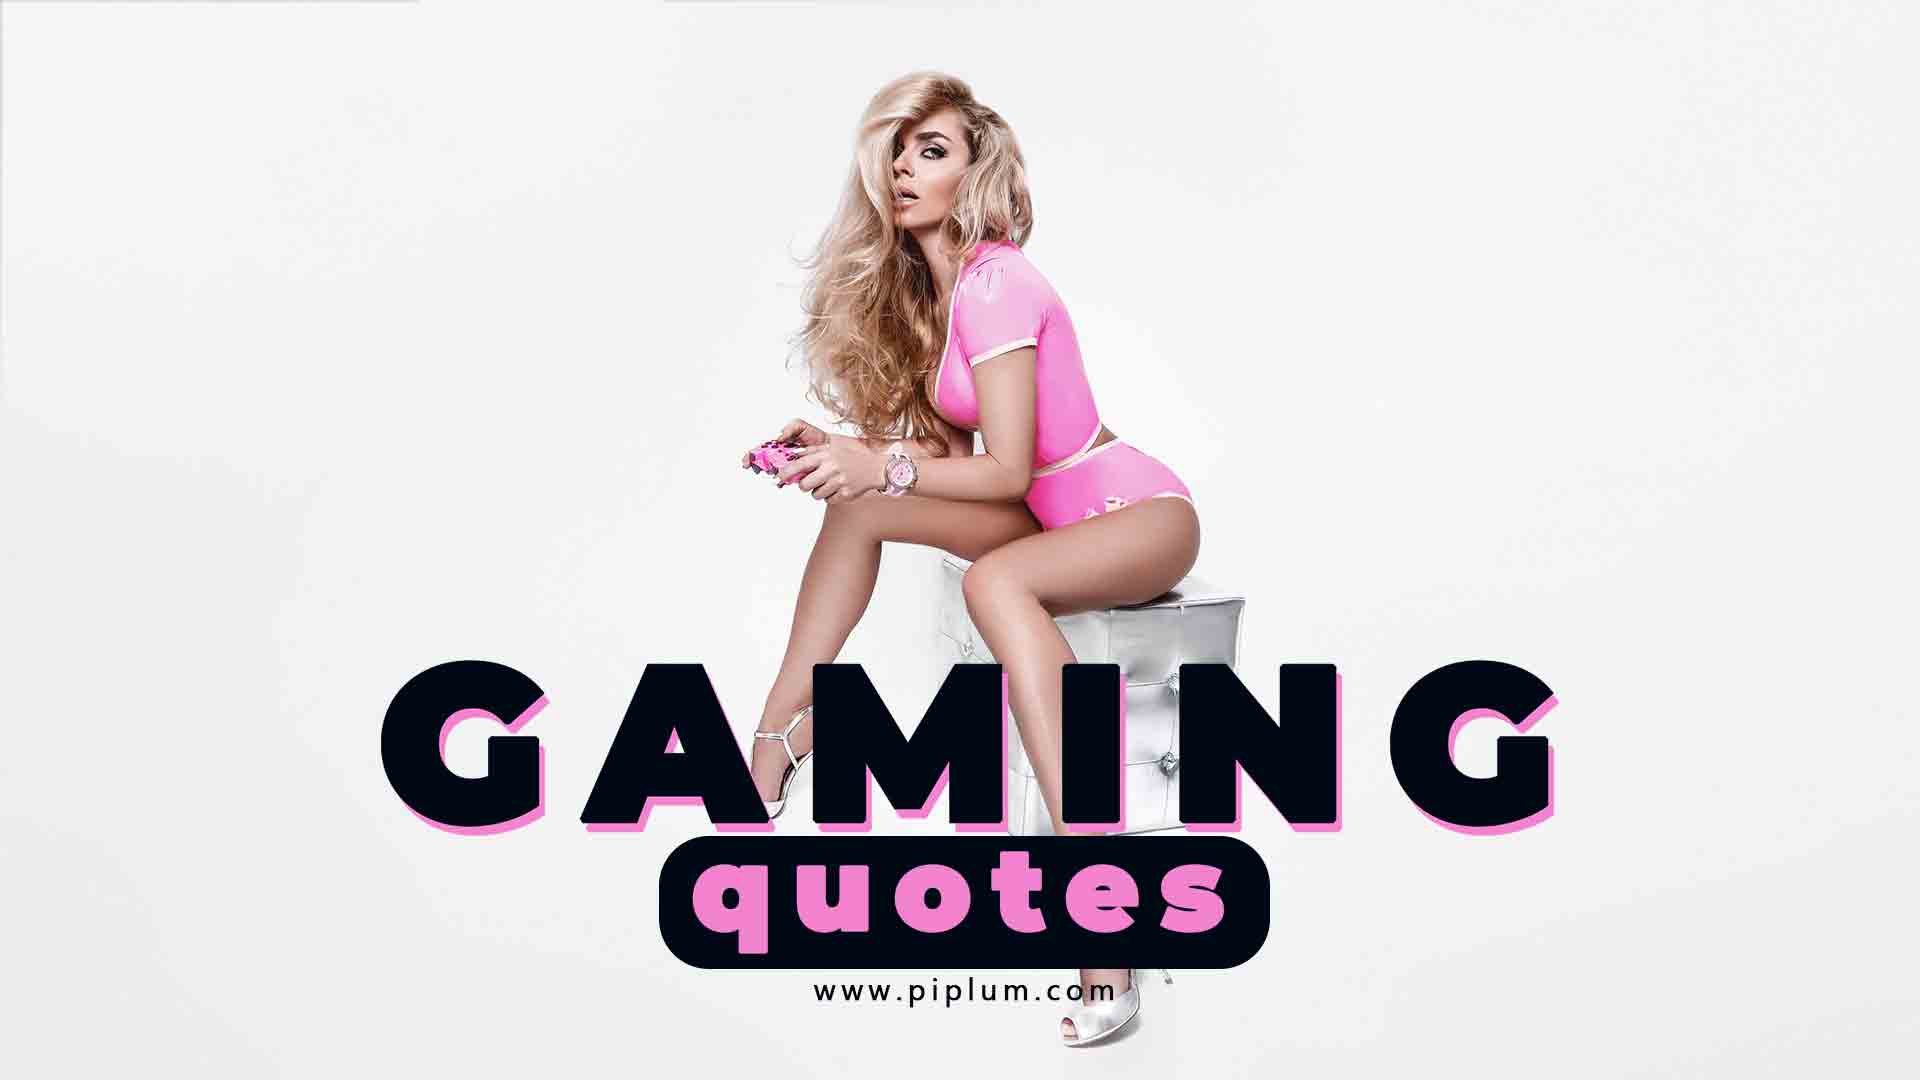 Girl-gamer-with-purple-clothes-inspirational-quote